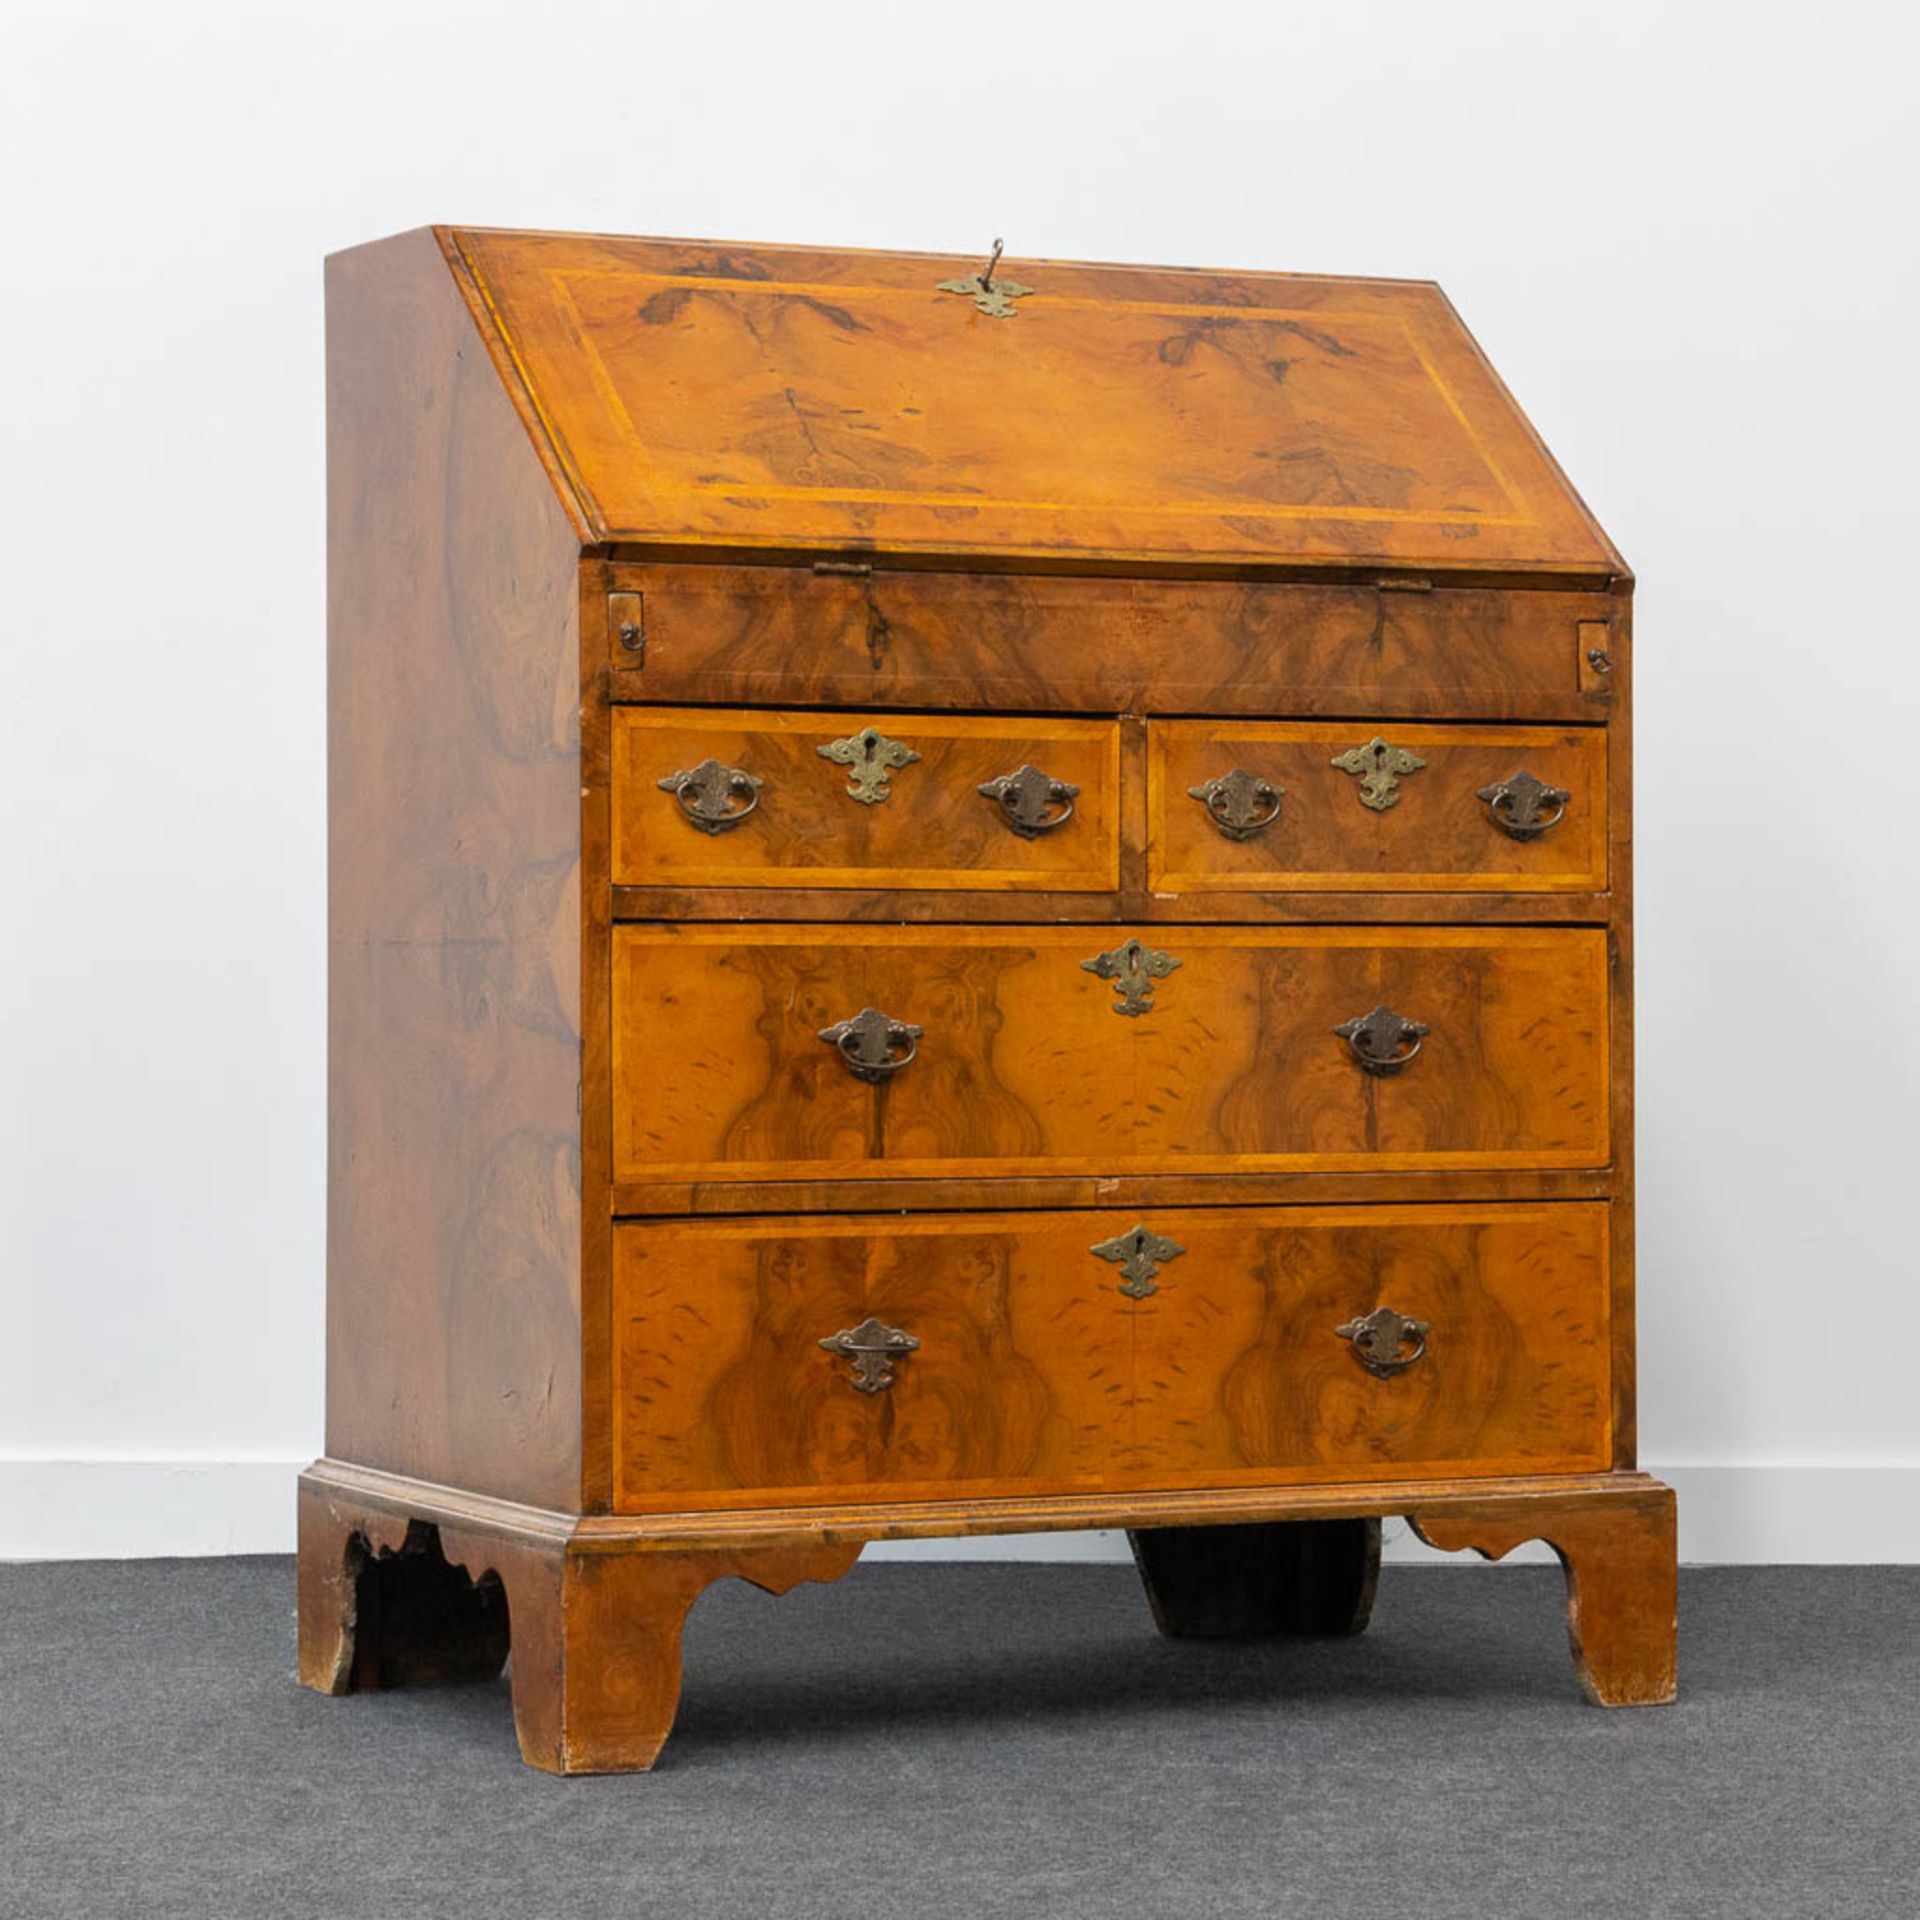 A secretaire of English origin, neatly finished with wood veneer and mounted with bronze.